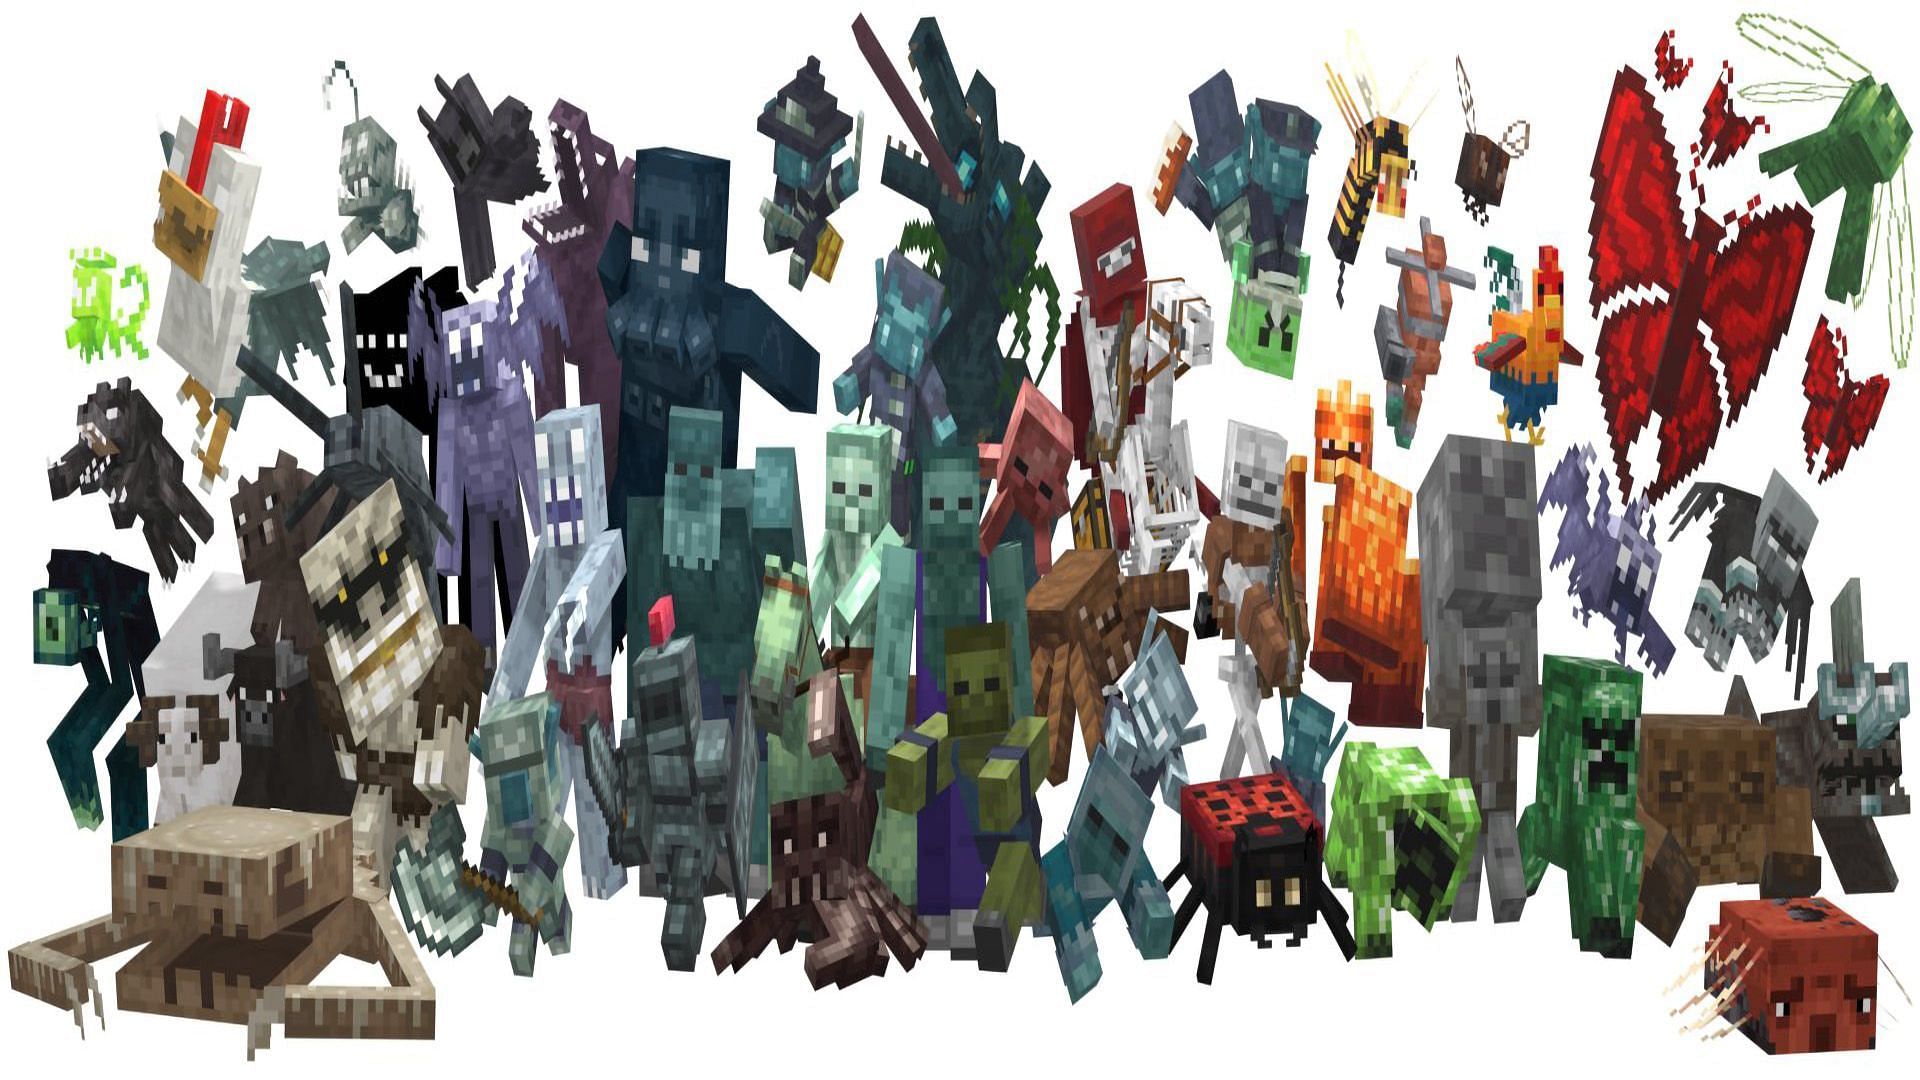 Adds several mobs for fighting (Image via curseforge.com)